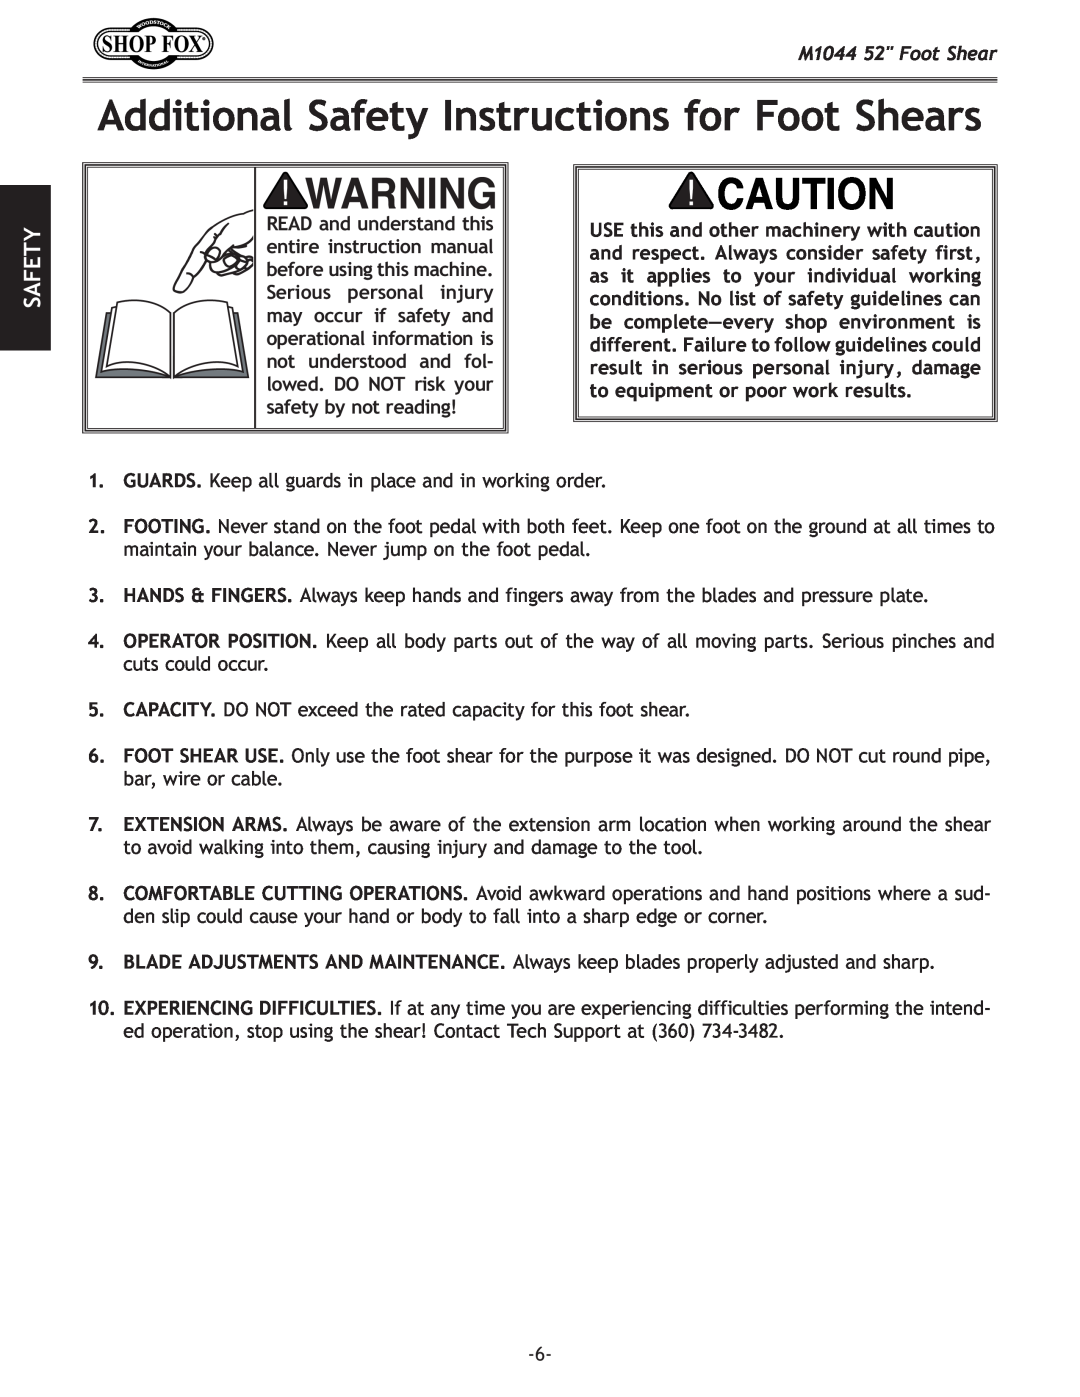 Woodstock manual Additional Safety Instructions for Foot Shears, M1044 52 Foot Shear 